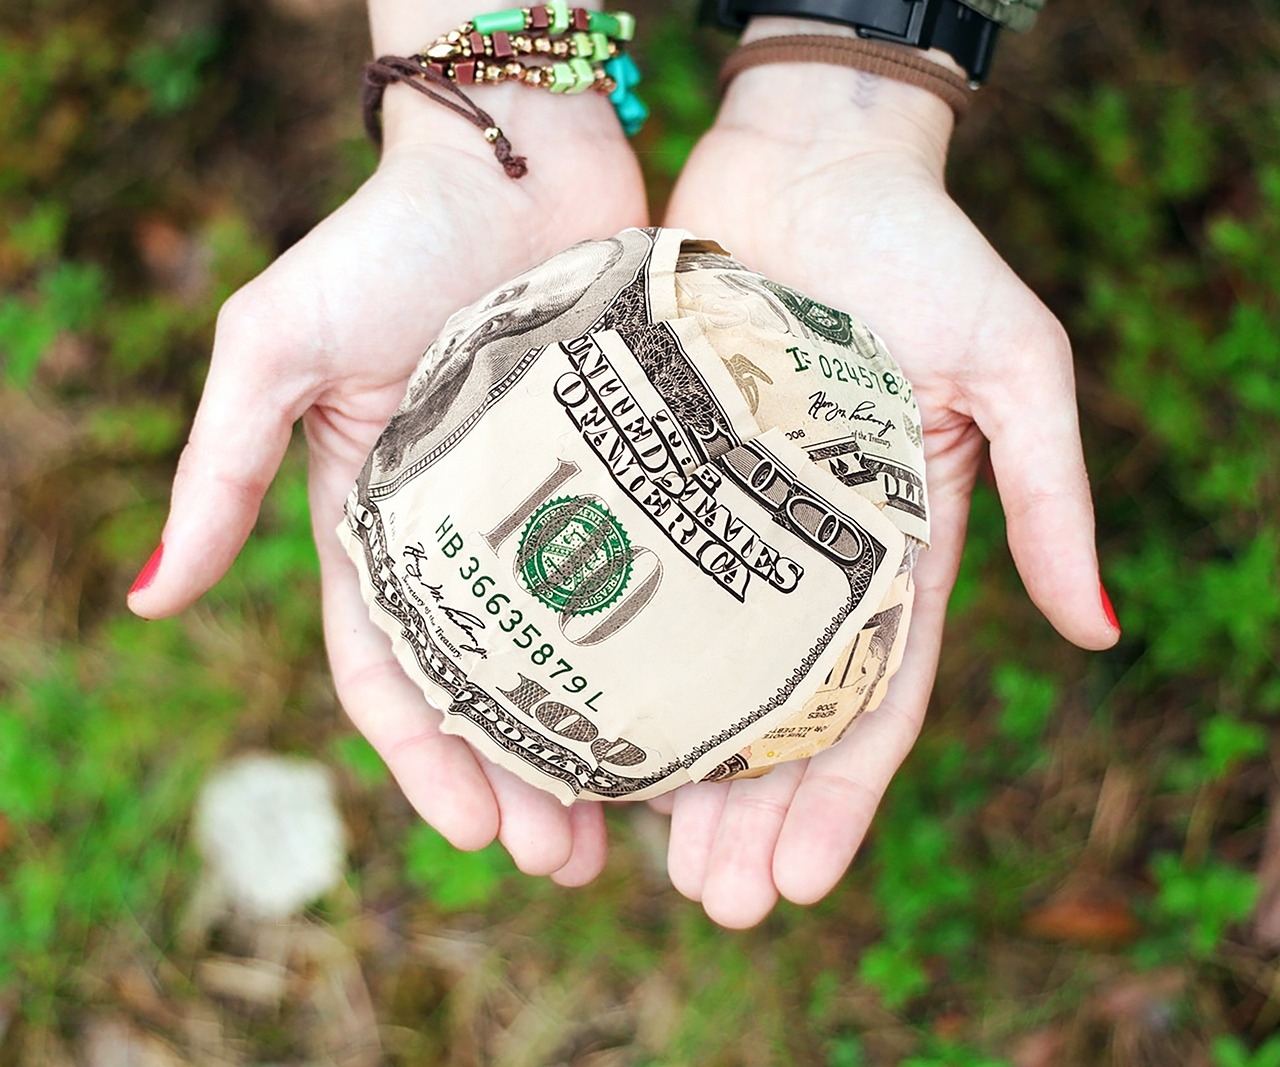 What You Need to Know About Crowdfunding